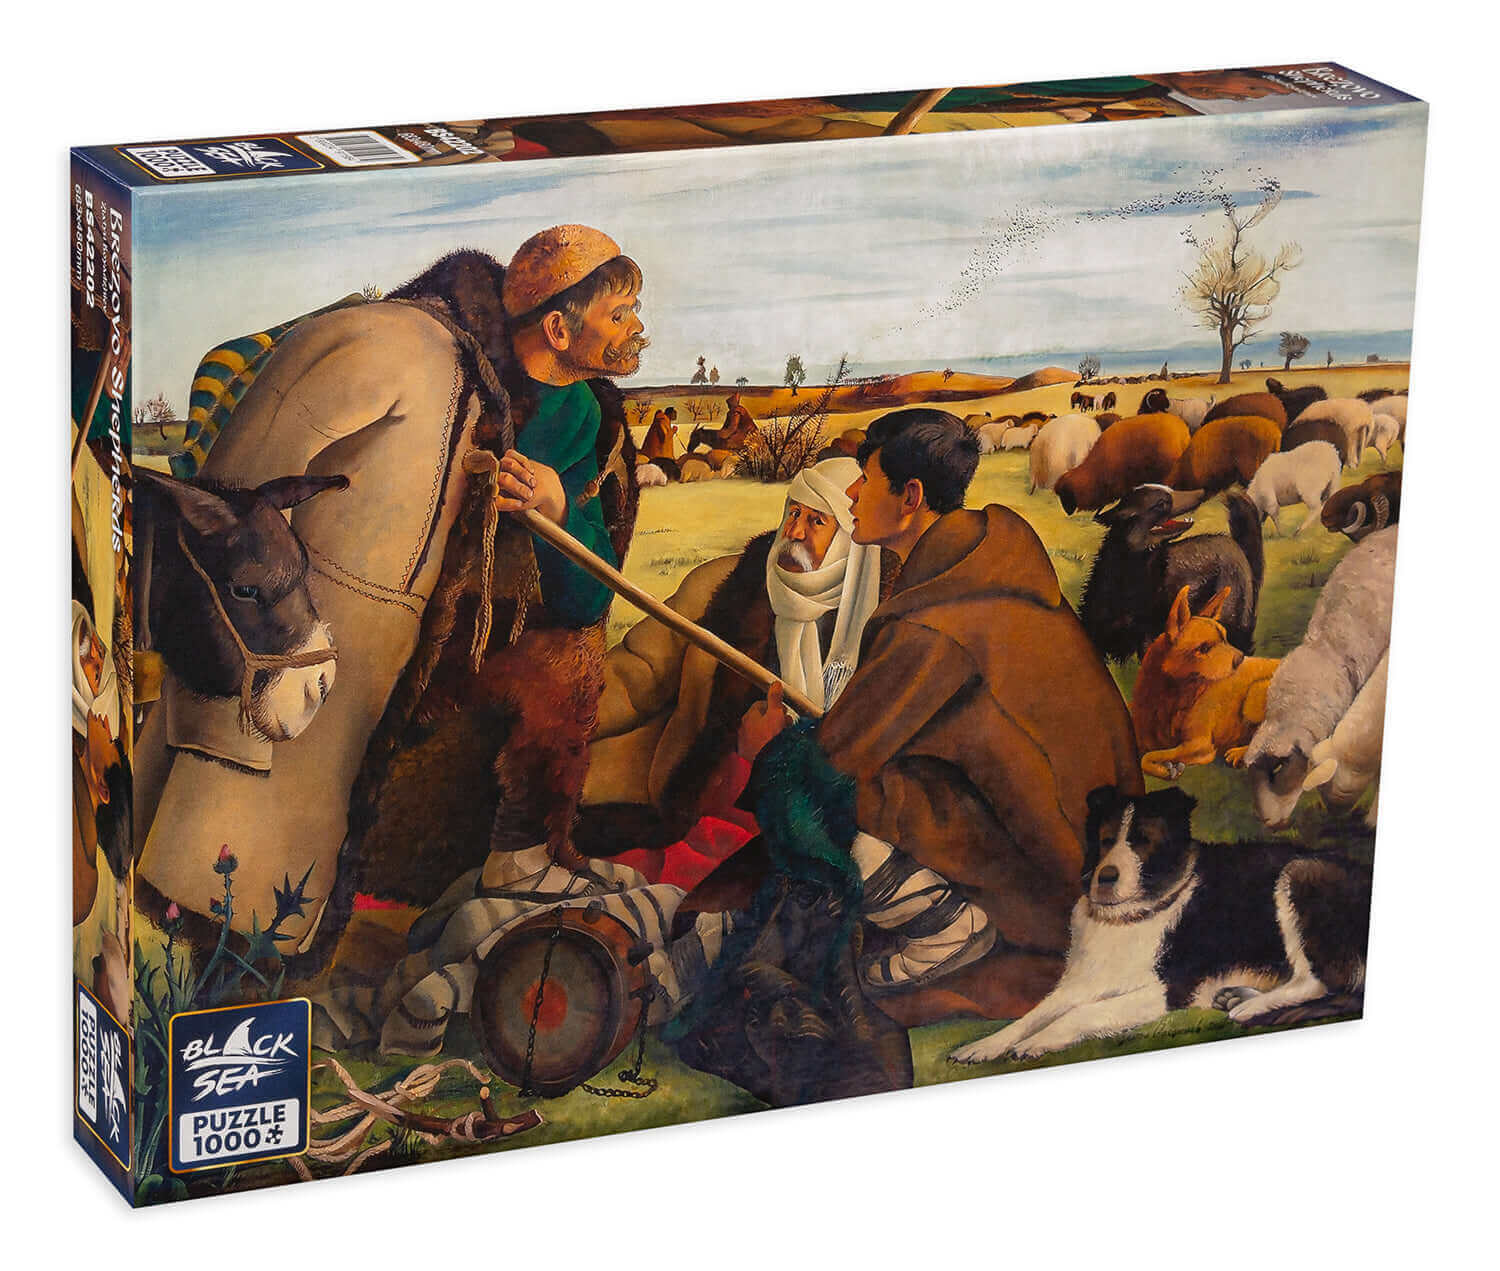 Puzzle Black Sea Premium 1000 pieces - Brezovo Shepherds, The emblematic painting Brezovo Shepherds dates from the first period of renowned Bulgarian painter Zlatyu Boyadzhiev; it is characterized by taut lines and a deep insight into the psyche of the de